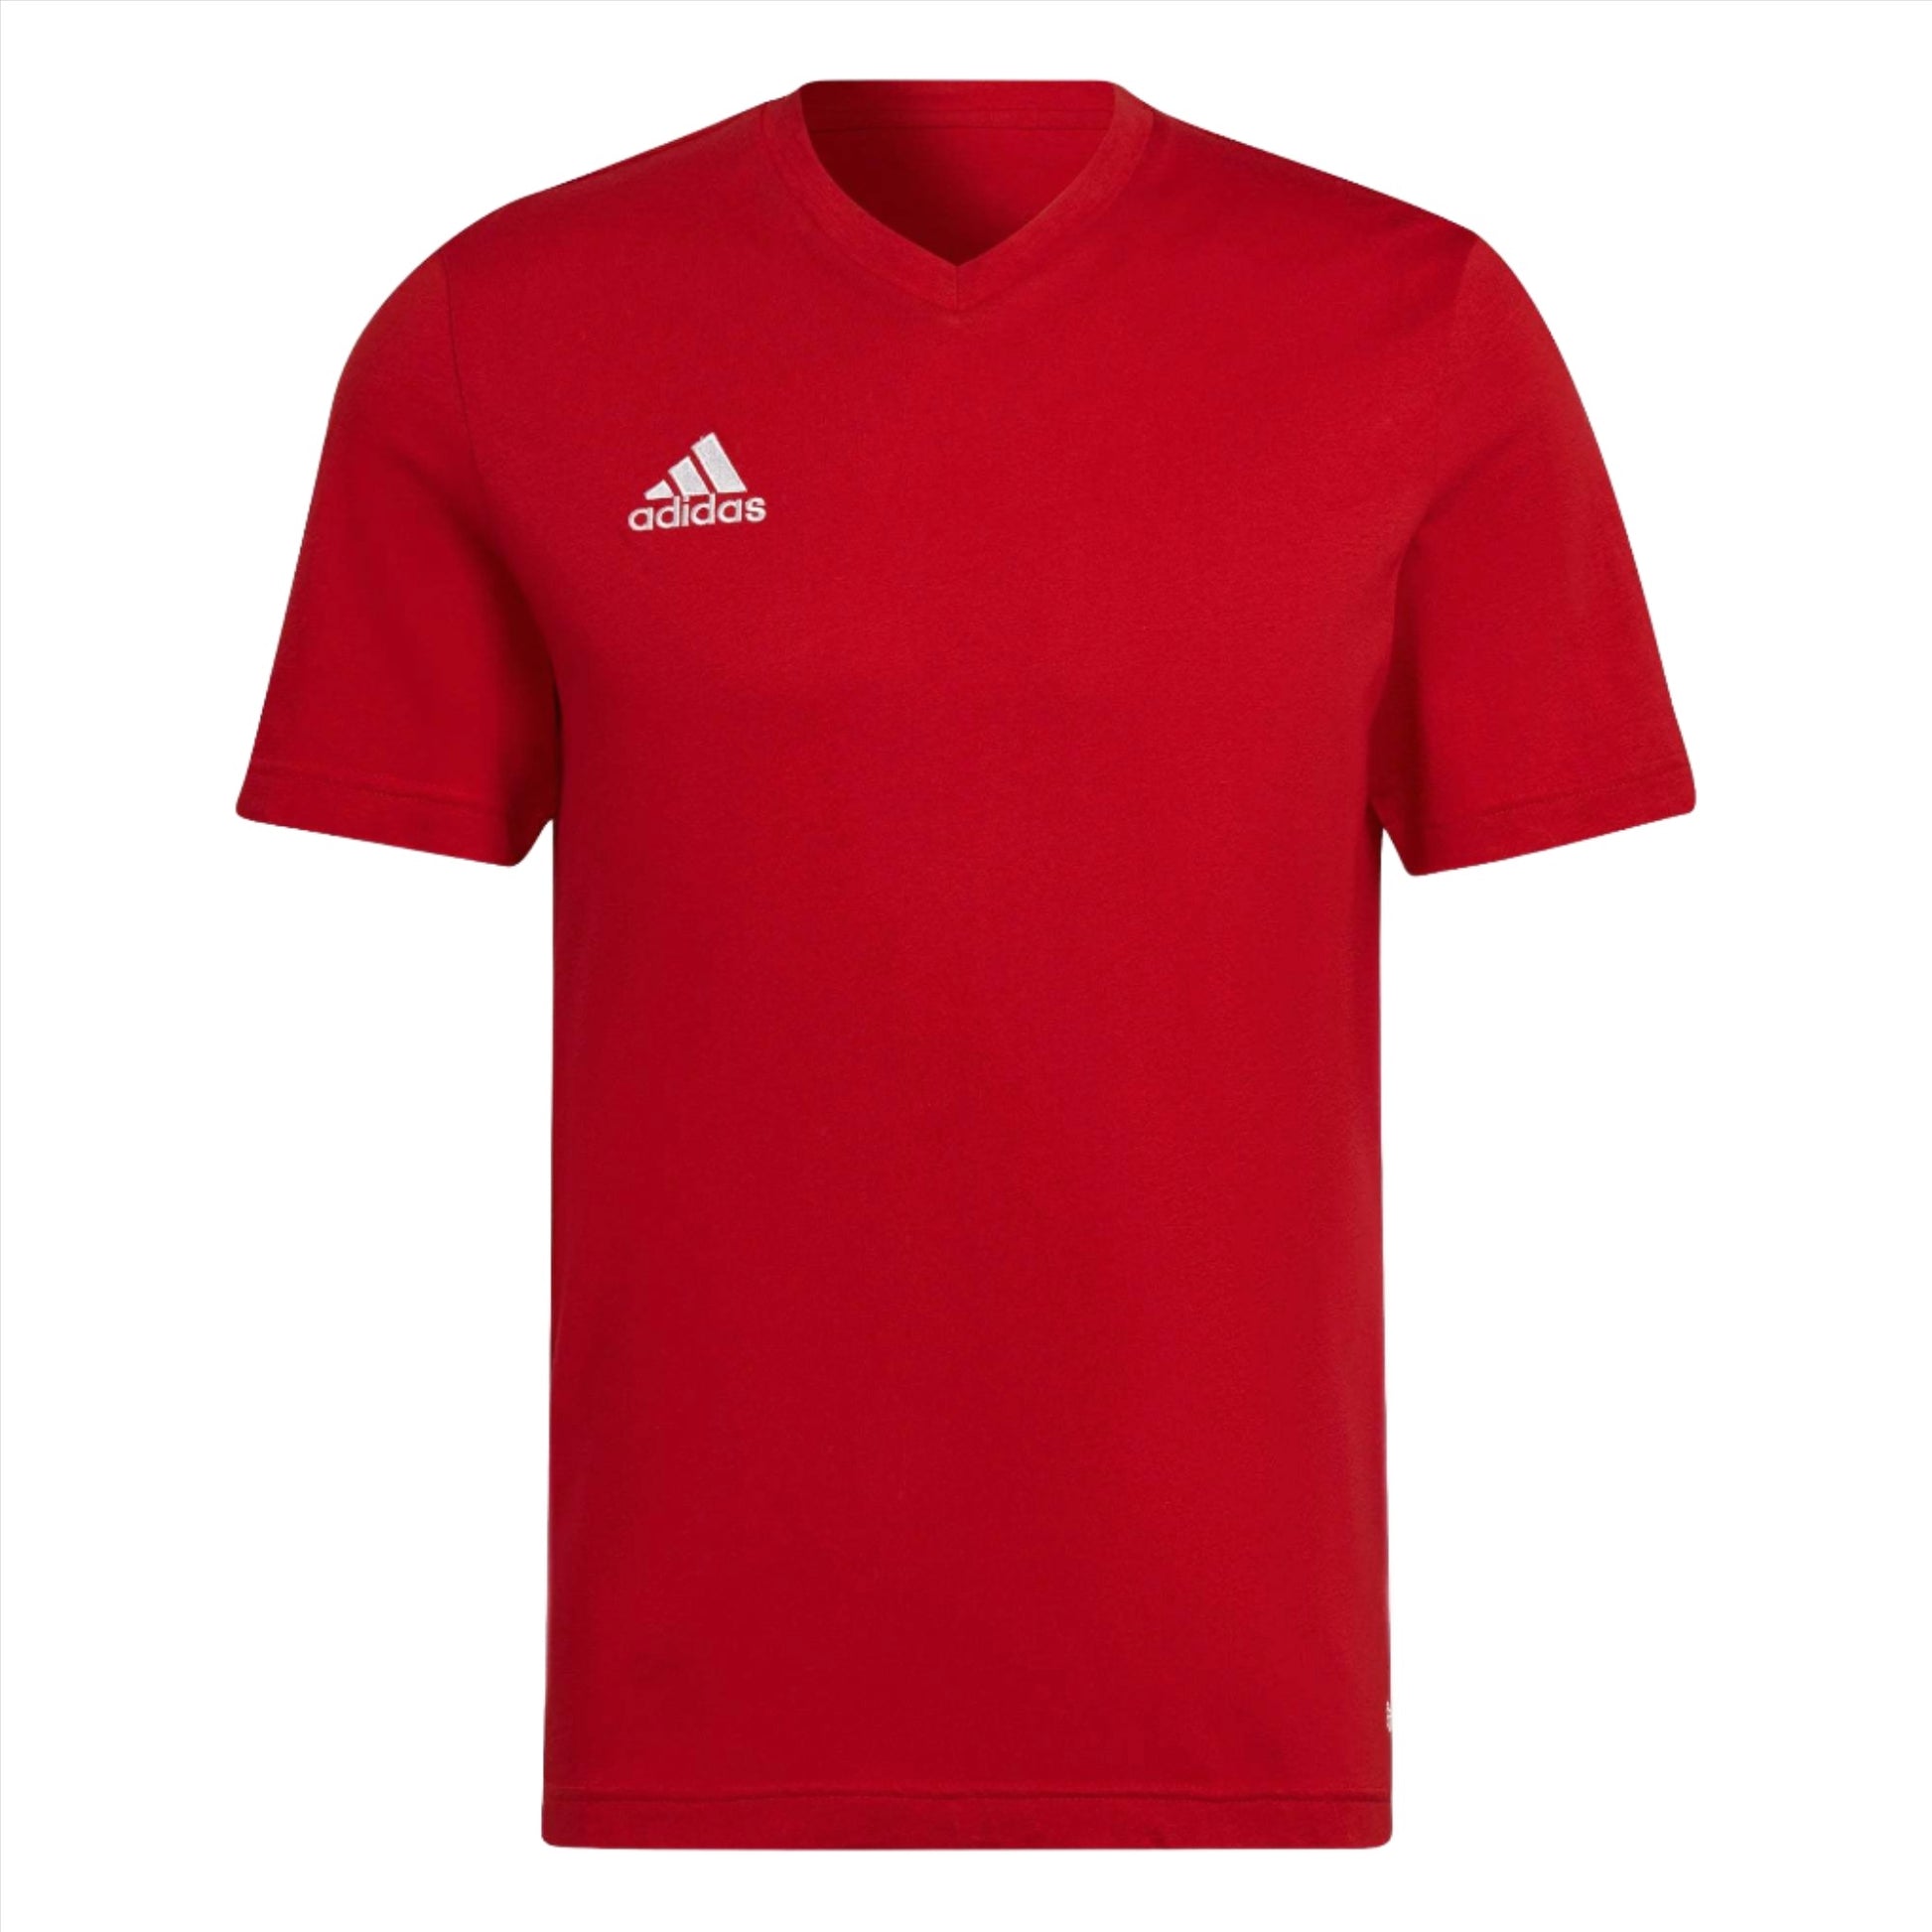 Entrada 22 Tee by Adidas - The Luxury Promotional Gifts Company Limited